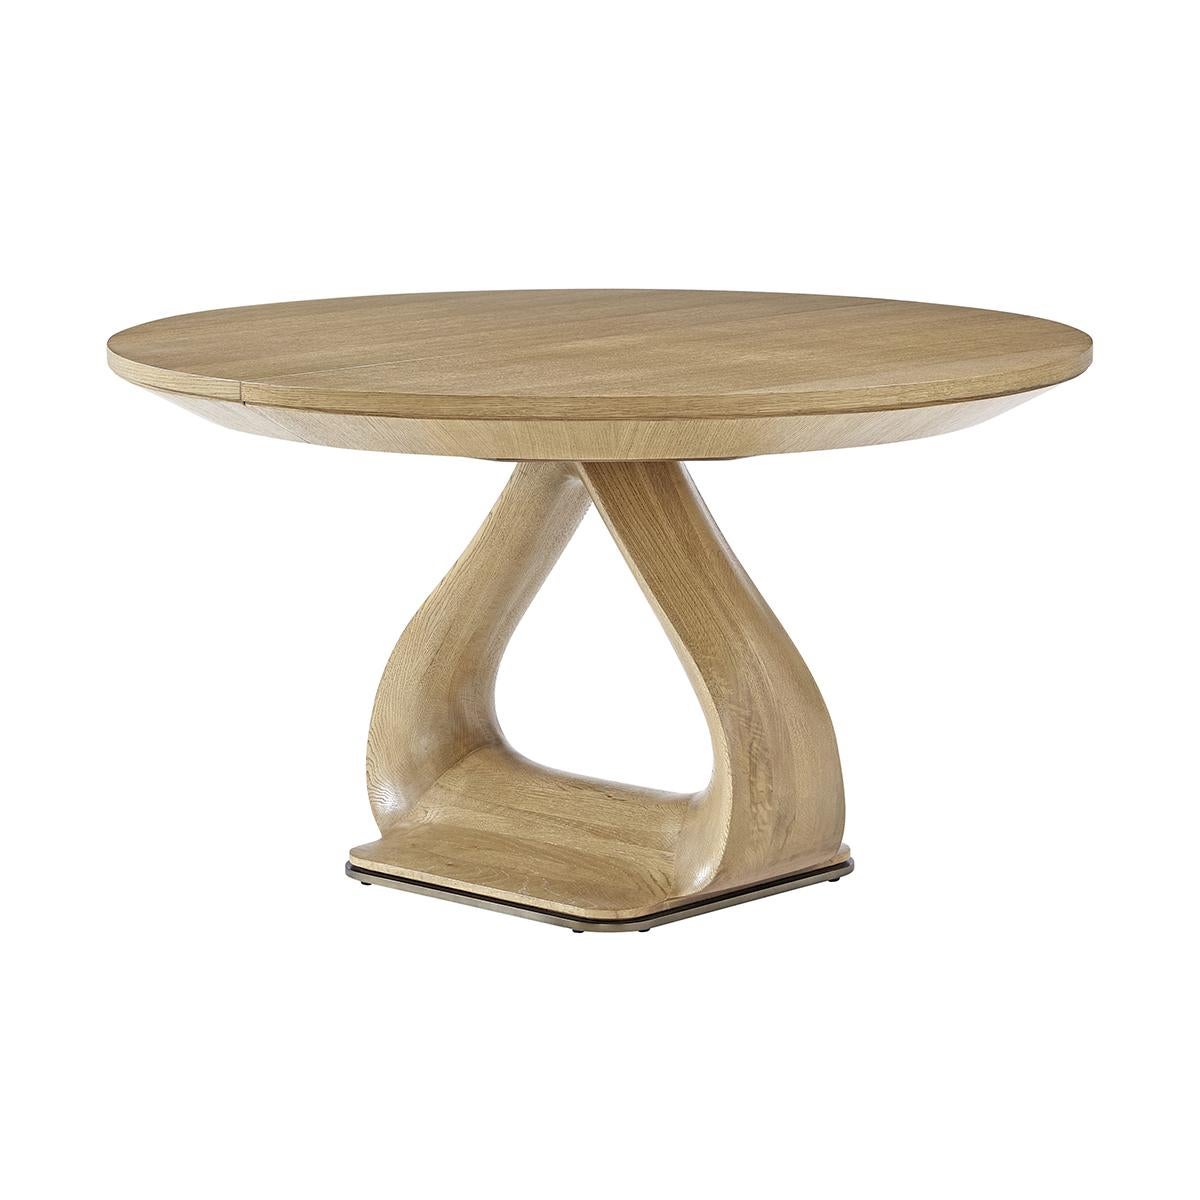 Masterfully crafted from oak, and finished in a fine blonde oak finish, this table showcases the natural beauty of the wood through its gentle, soft lines and a knife-edge top, creating a sophisticated and inviting atmosphere.

Featuring a unique